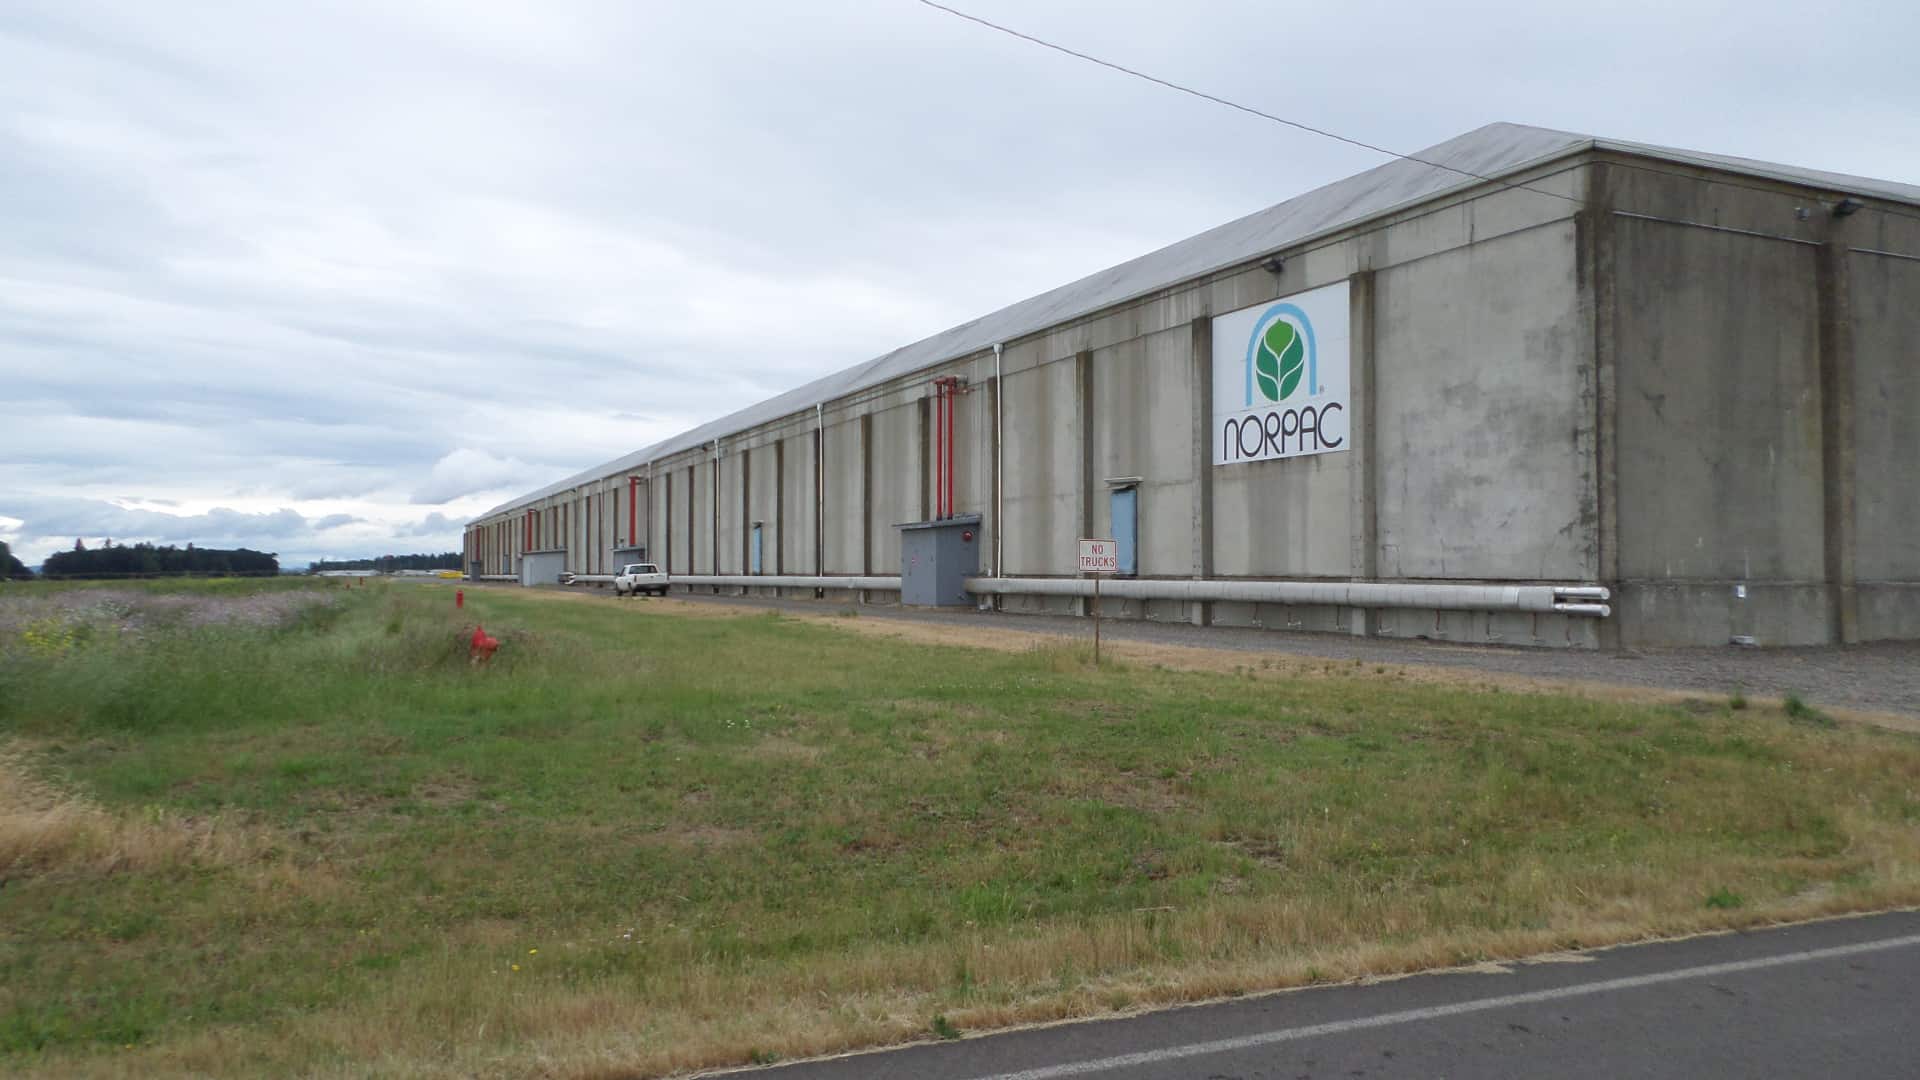 Norpac facility in Brooks, OR